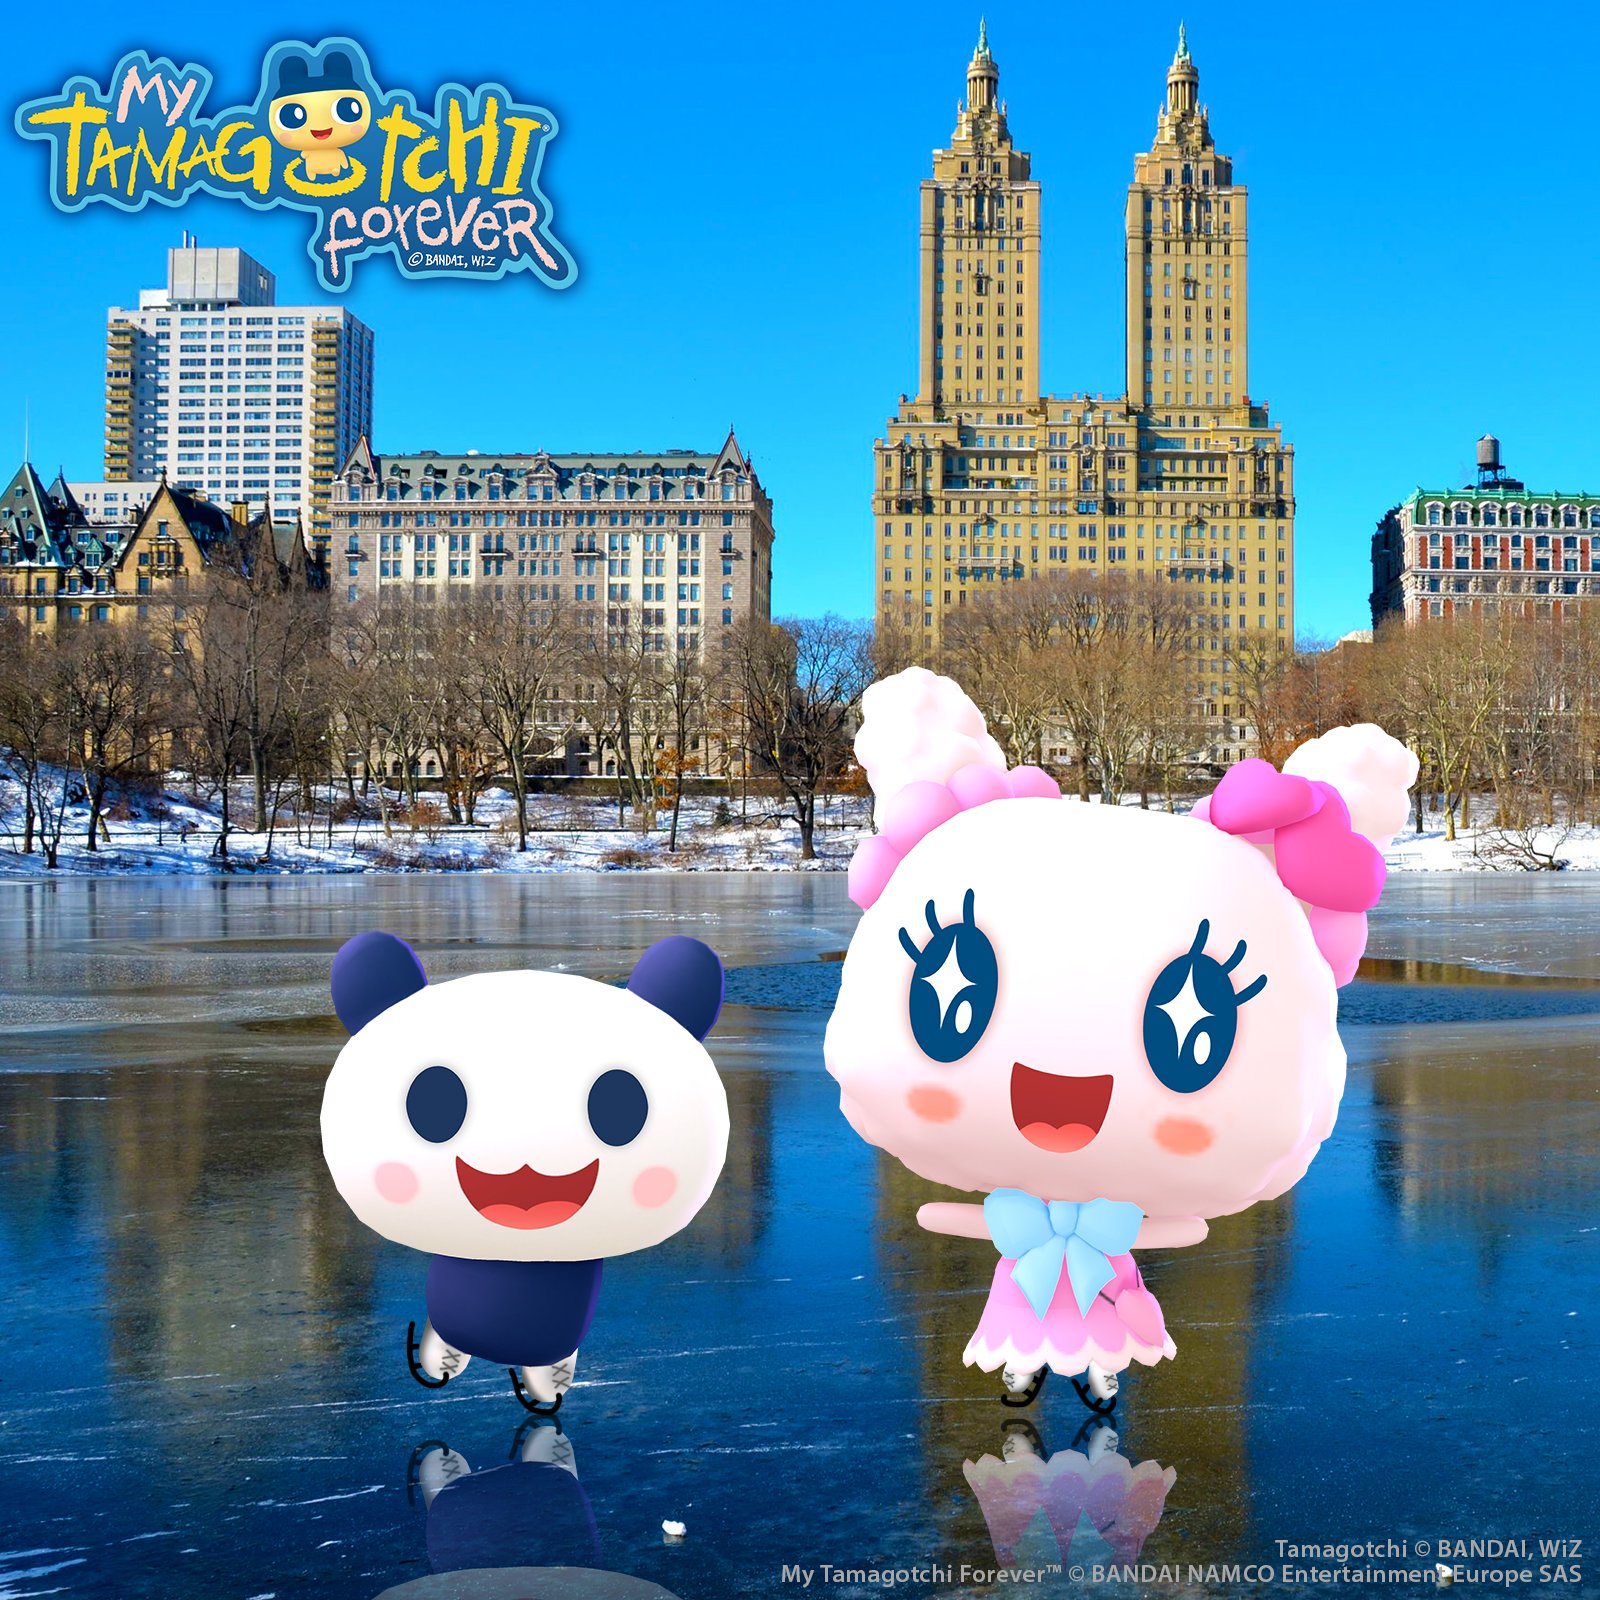 My Tamagotchi Forever on Twitter: "Puchitchi and Lovelitchi are enjoying  every moment of this season! ⛸ Show us how you and your  #MyTamagotchiForever friends are enjoying the current season! #Tamagotchi  https://t.co/7W7qfi7Lpw" /